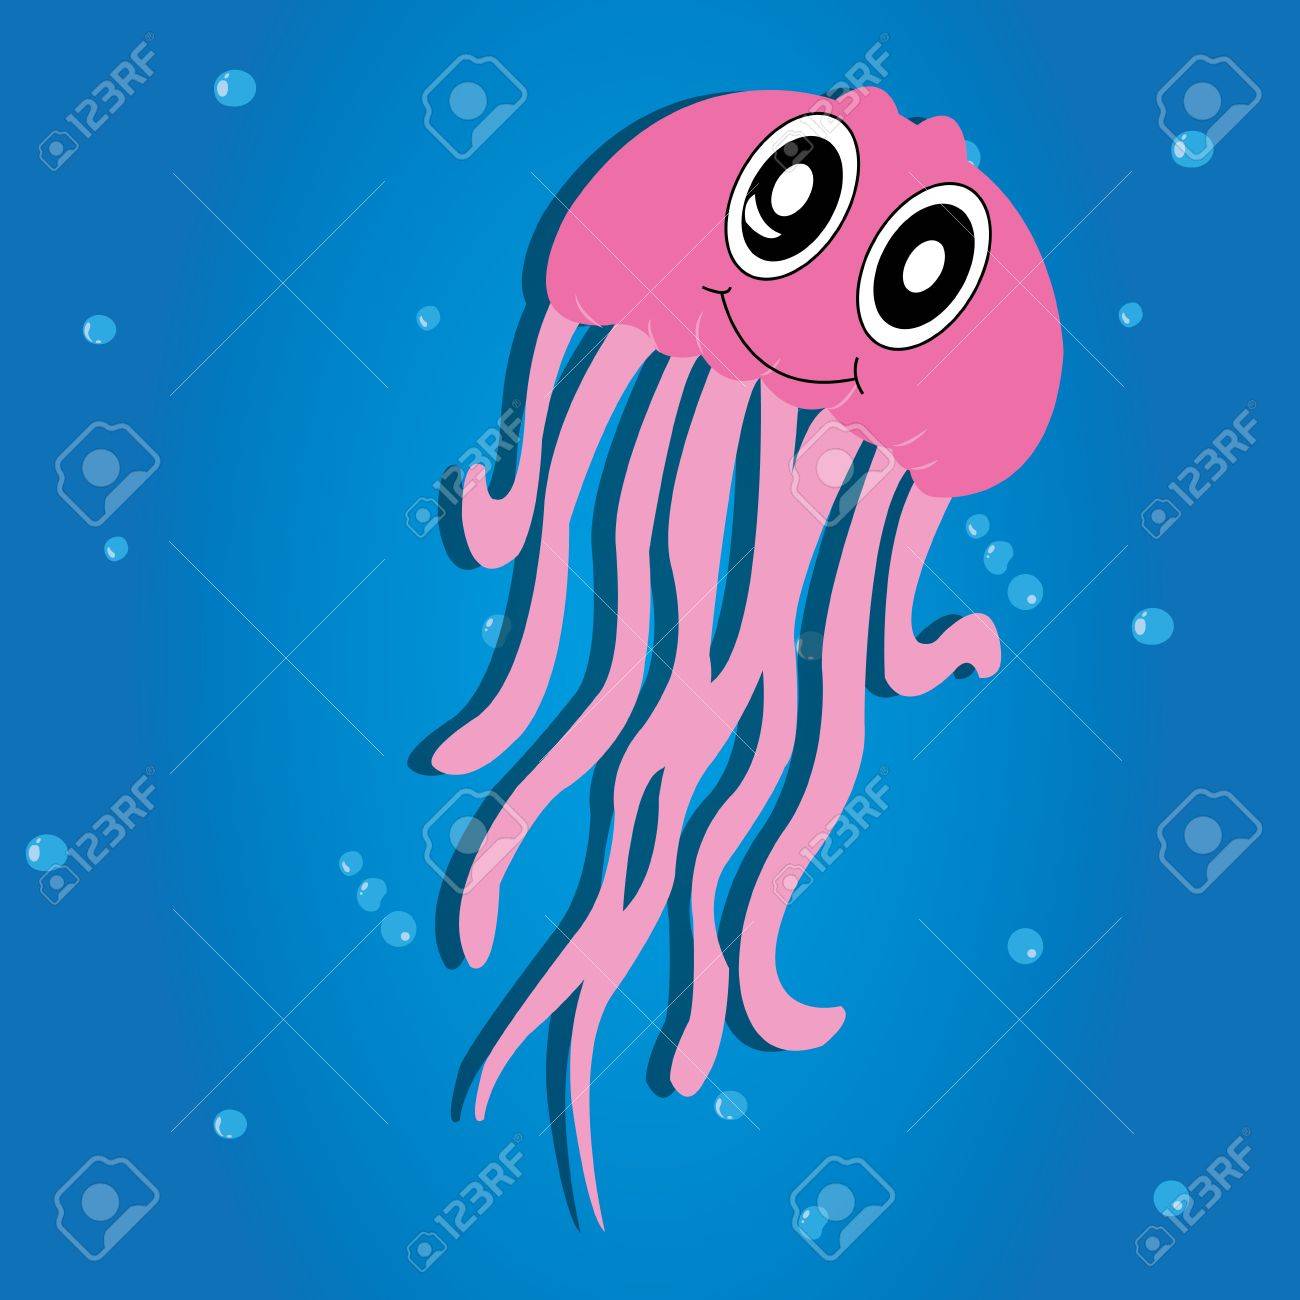 Pink Medusa On Blue Background With Bubbles Royalty Free Cliparts